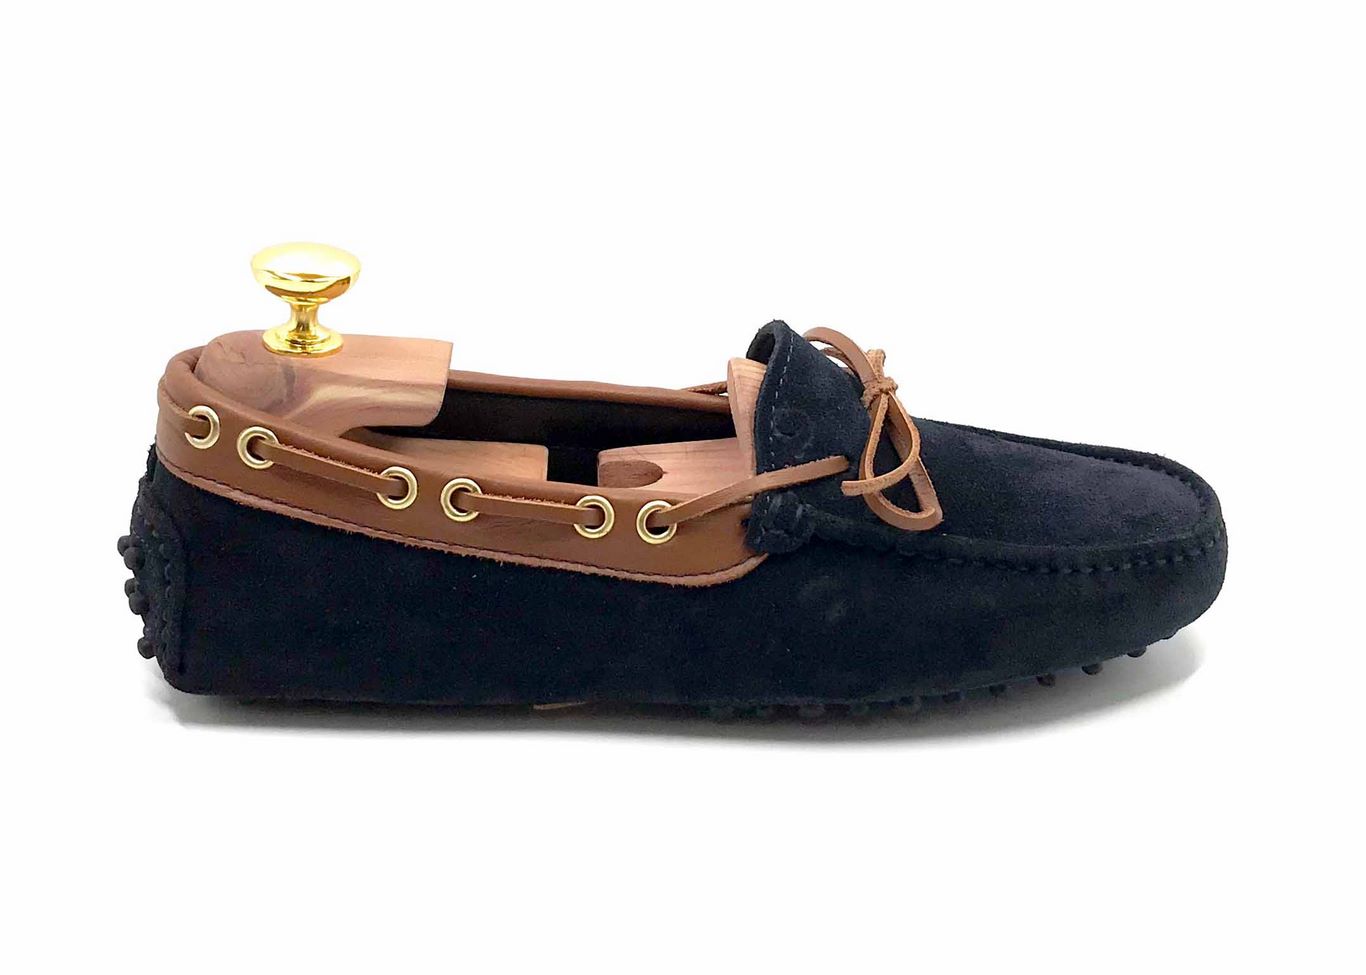 Loafers 'Drive' in dark Blue navy suede with light Brown details